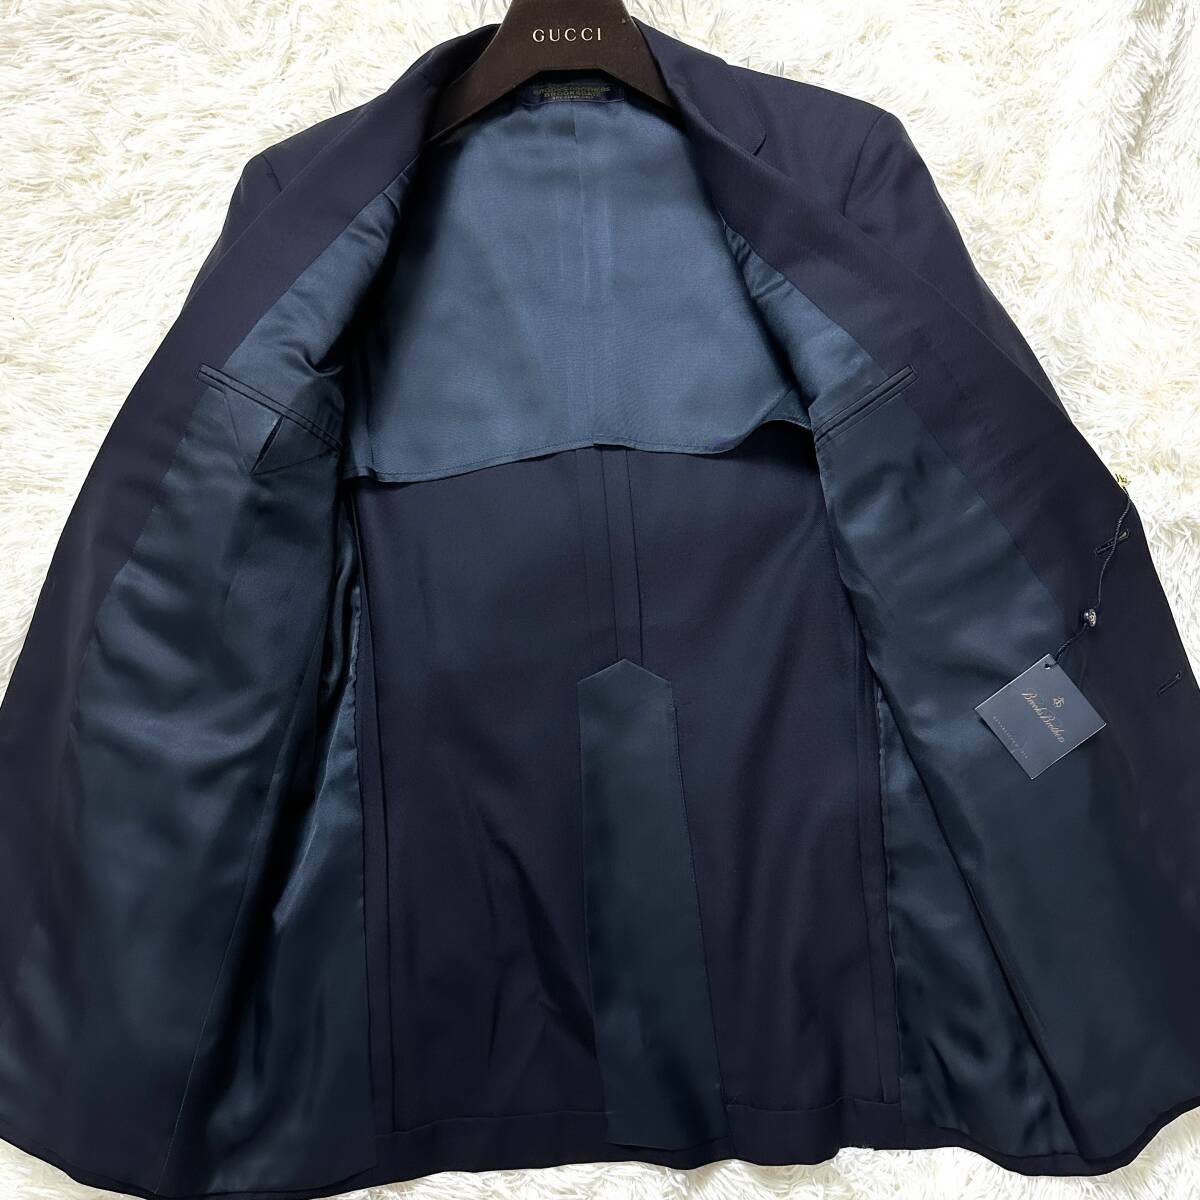  ultimate beautiful goods rare XL.LL~L!BROOKS BROTHERS setup suit 2 piece black navy blue black navy total reverse side spring autumn oriented YA72B large size Brooks Brothers 